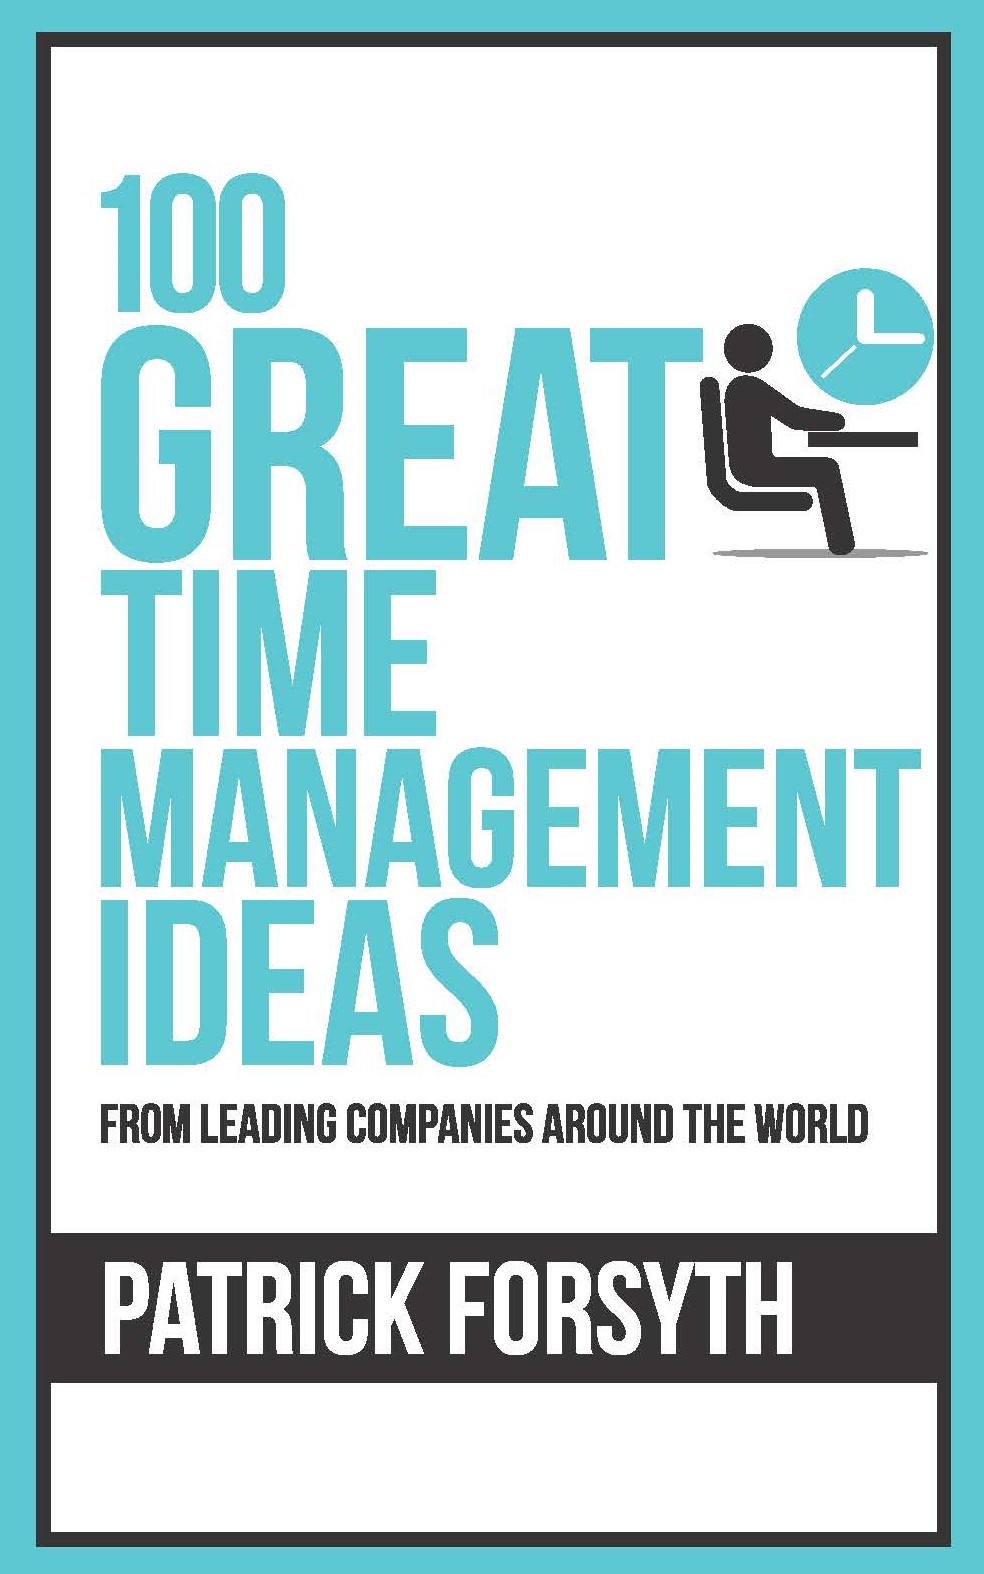 100 Great Time Management Ideas